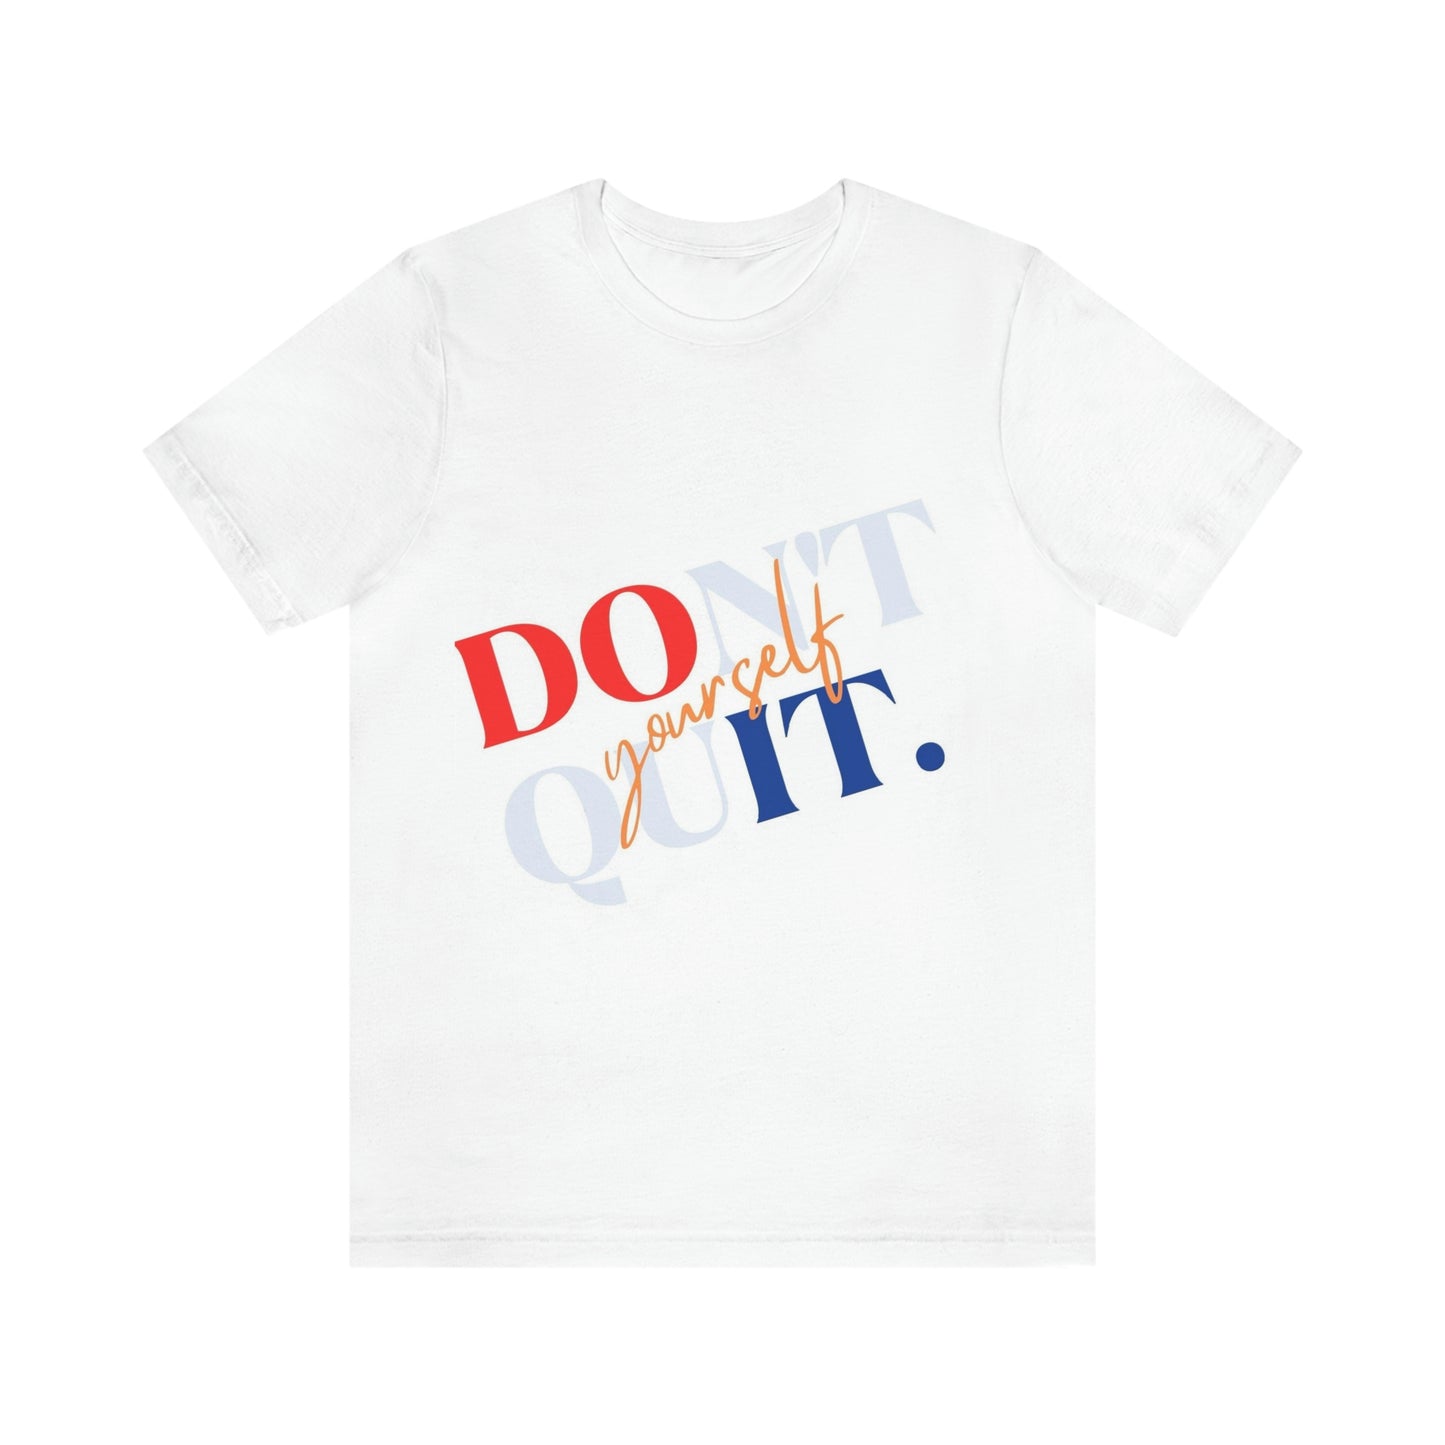 Don’t Quit Do it yourself tshirt Unisex Jersey Short Sleeve Tee